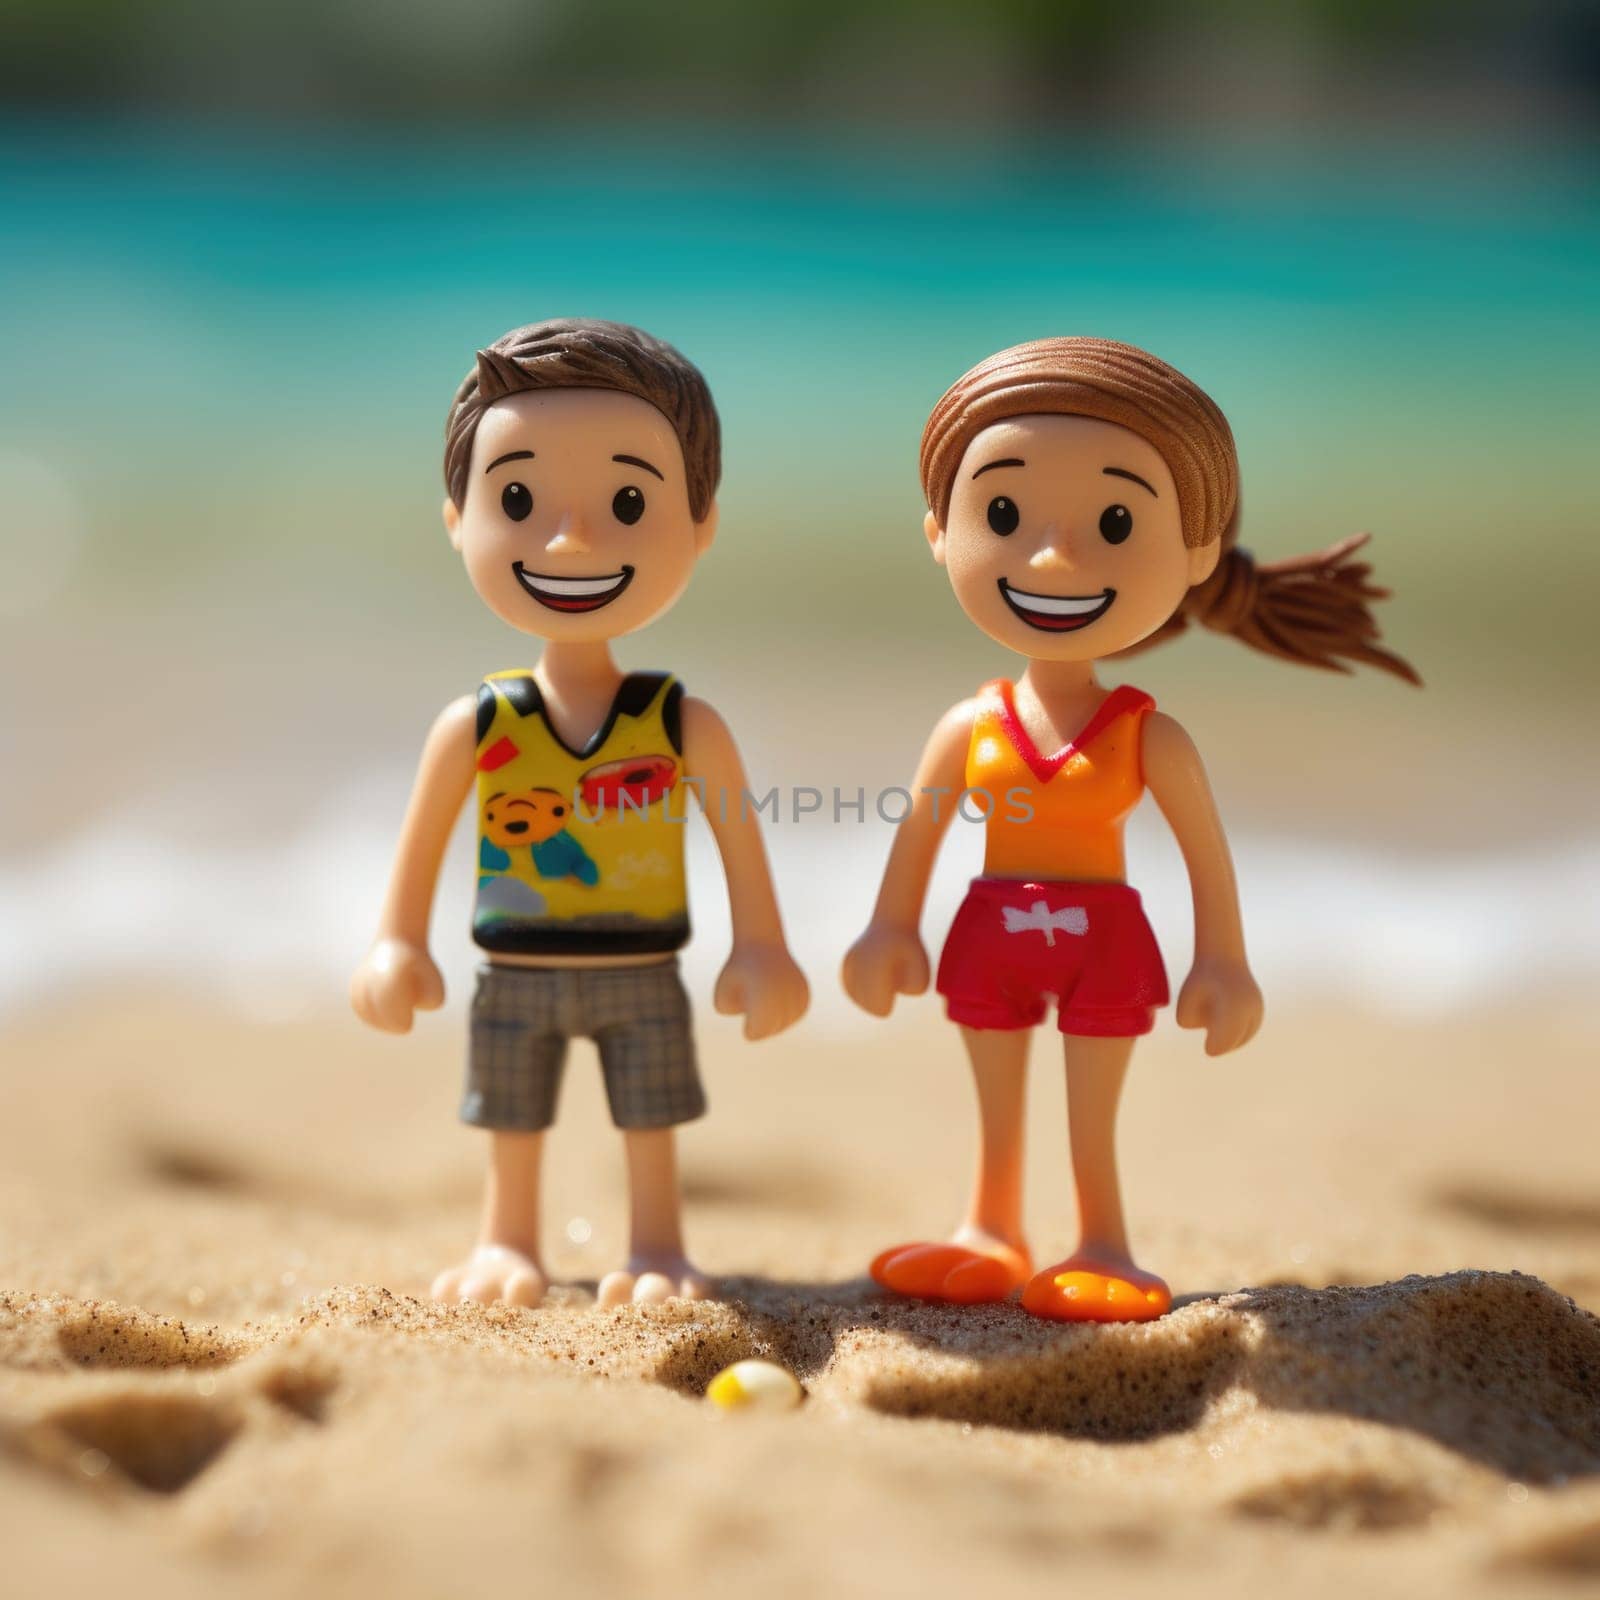 A couple of toy people standing on a beach